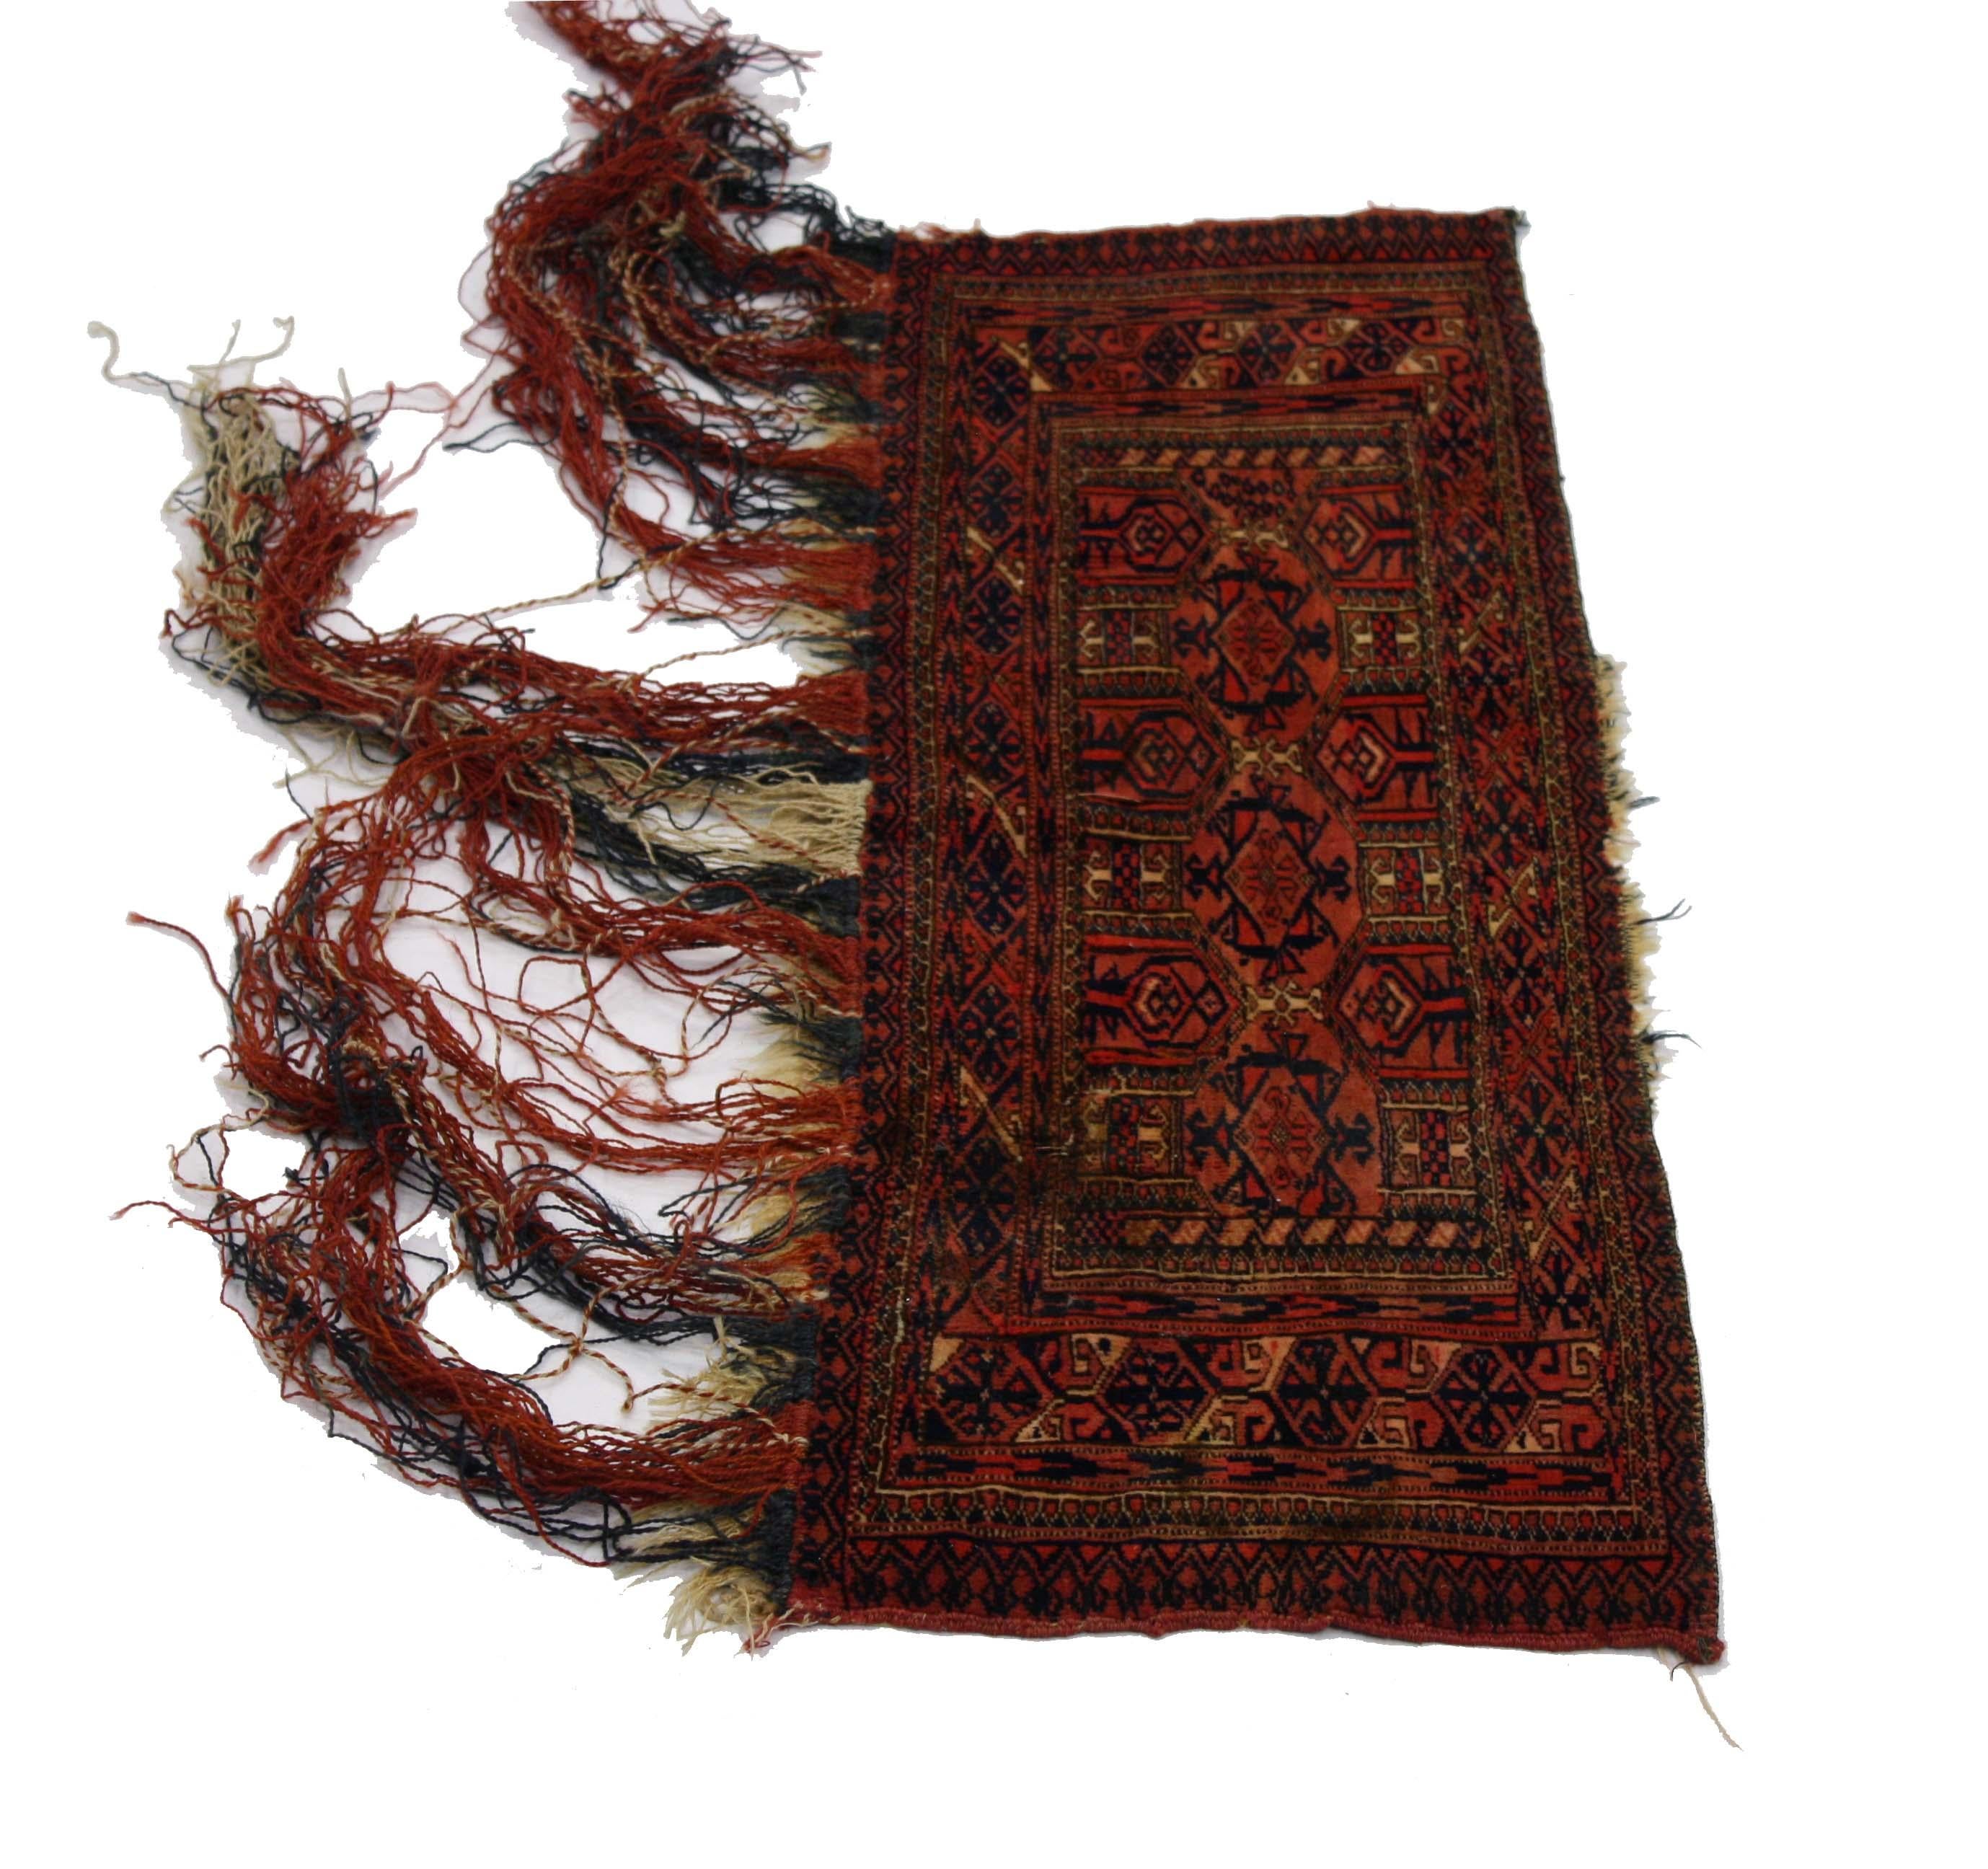 Wool Antique Afghan Turkoman Turkmen Torba Bag, Wall Hanging, Tribal Textile Tapestry For Sale